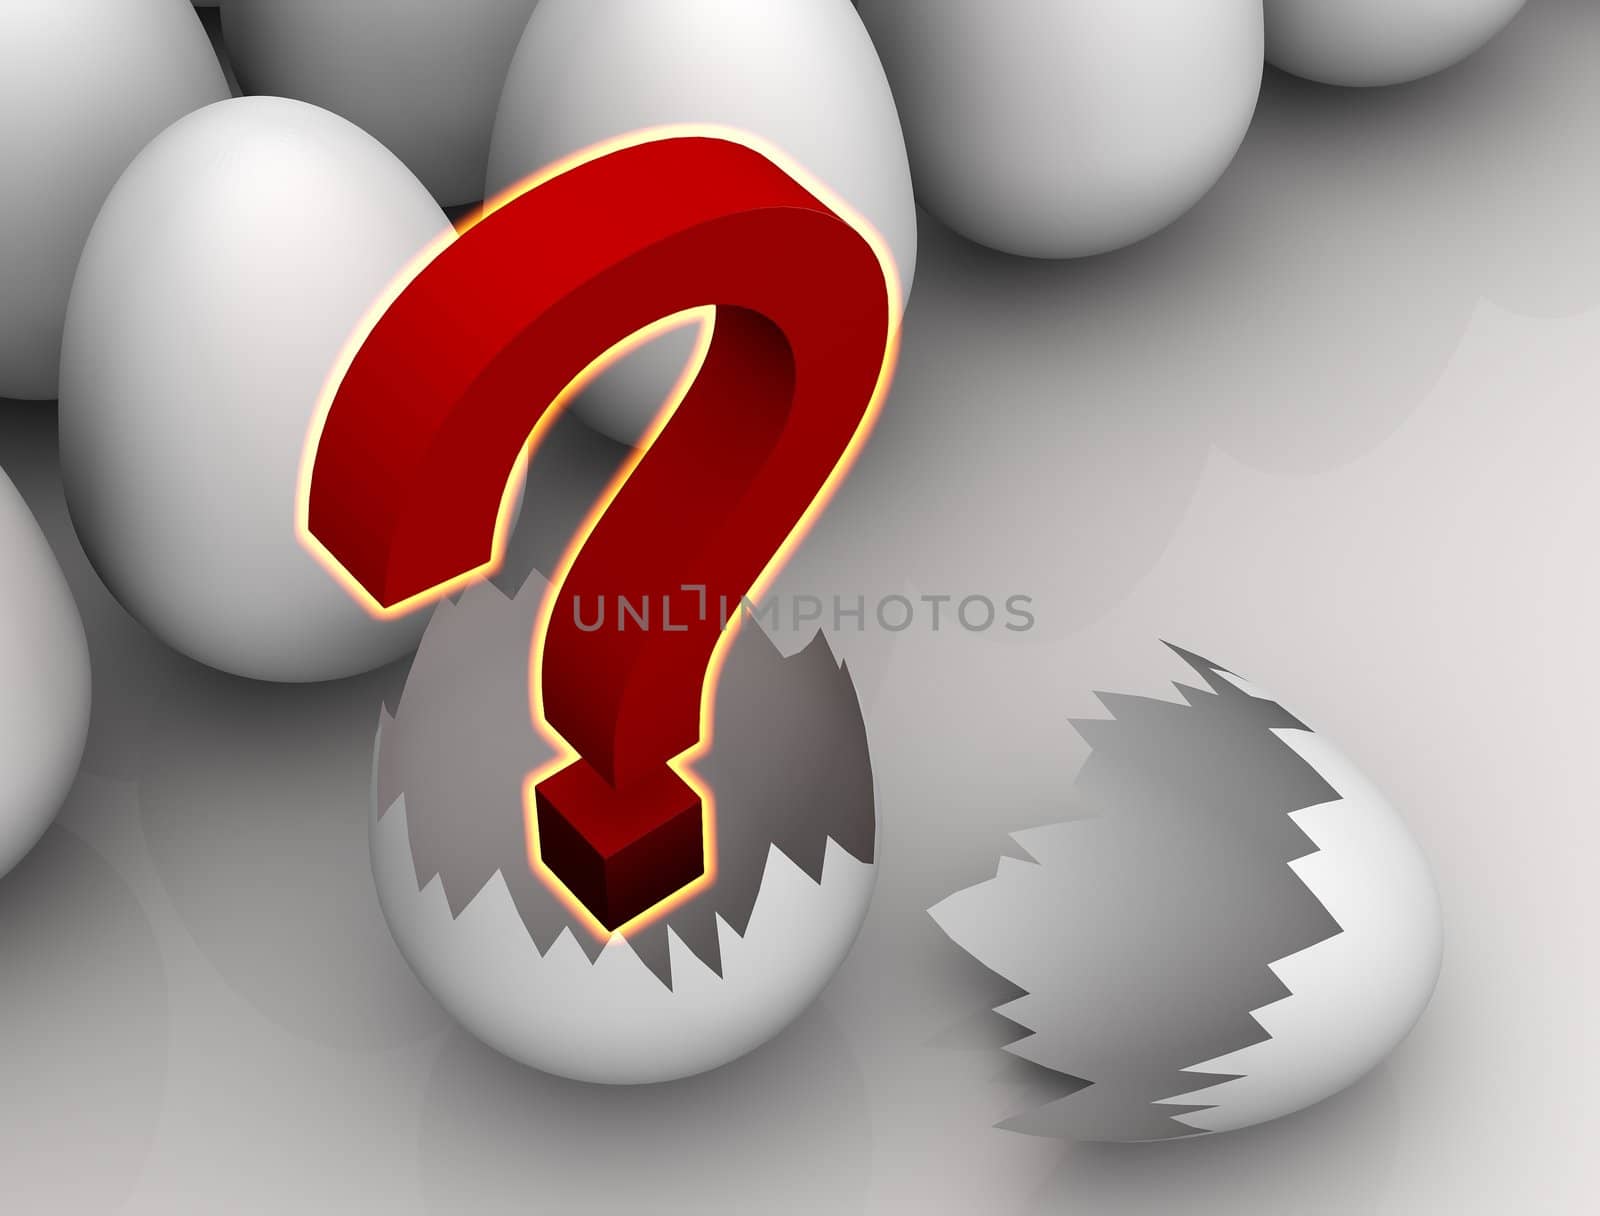 Concept of crowd of white not-yet cracked eggs with one egg already cracked. Close view of cracked egg unhides red glowing question mark as a symbol of something unknown, hidden or some secret. Scene rendered and isolated on white background with slight reflection.